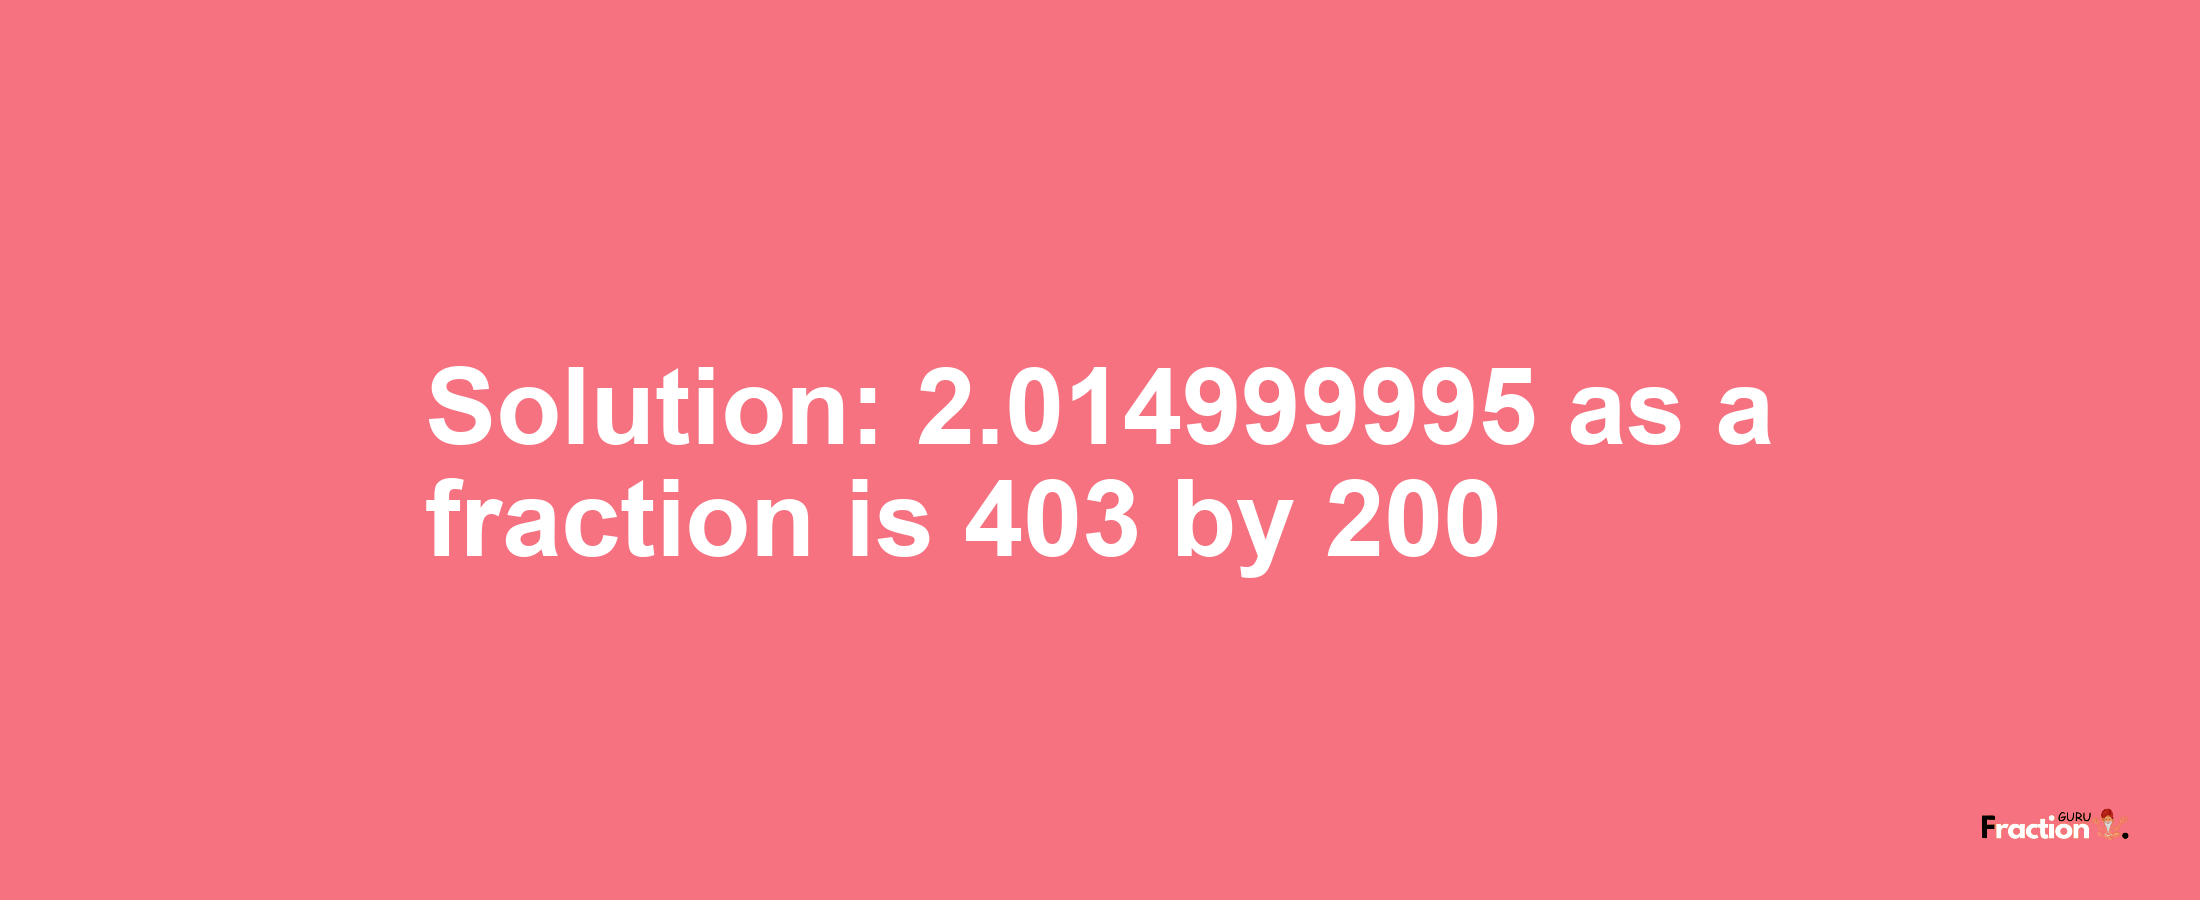 Solution:2.014999995 as a fraction is 403/200